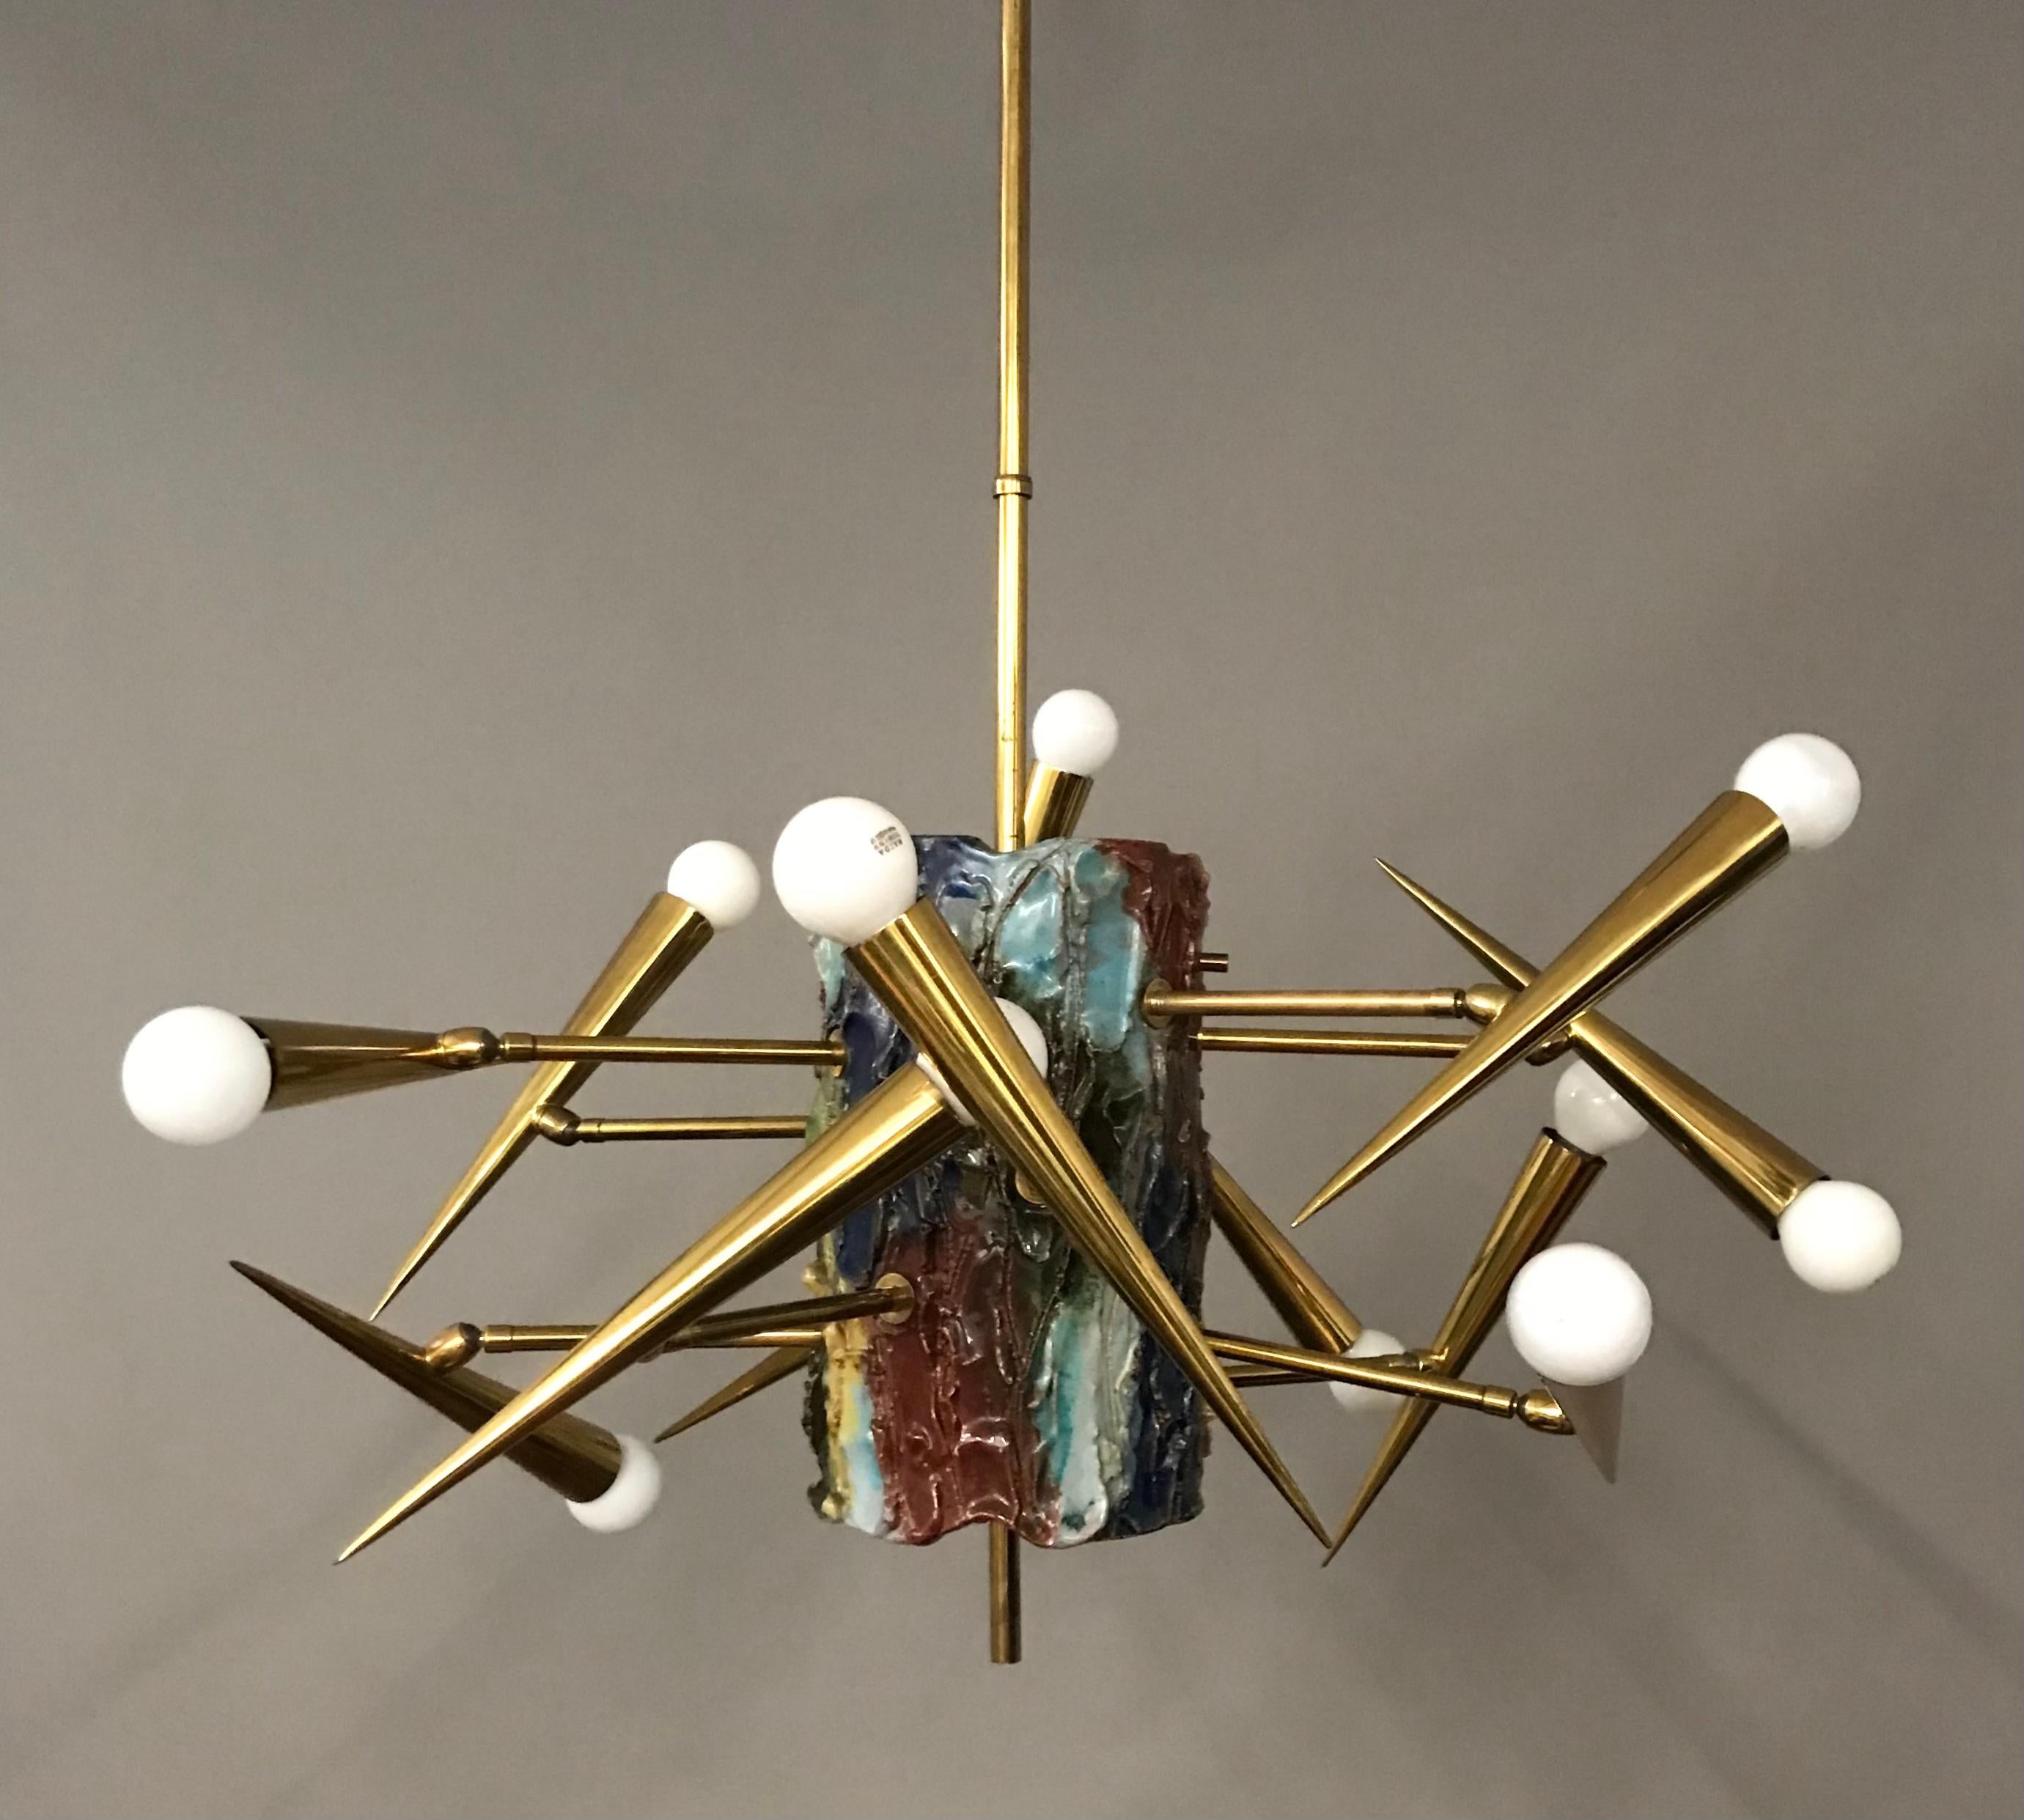 Leoncillo Leonardi's ceiling lamp in ceramic and brass with adjustable lights For Sale 5